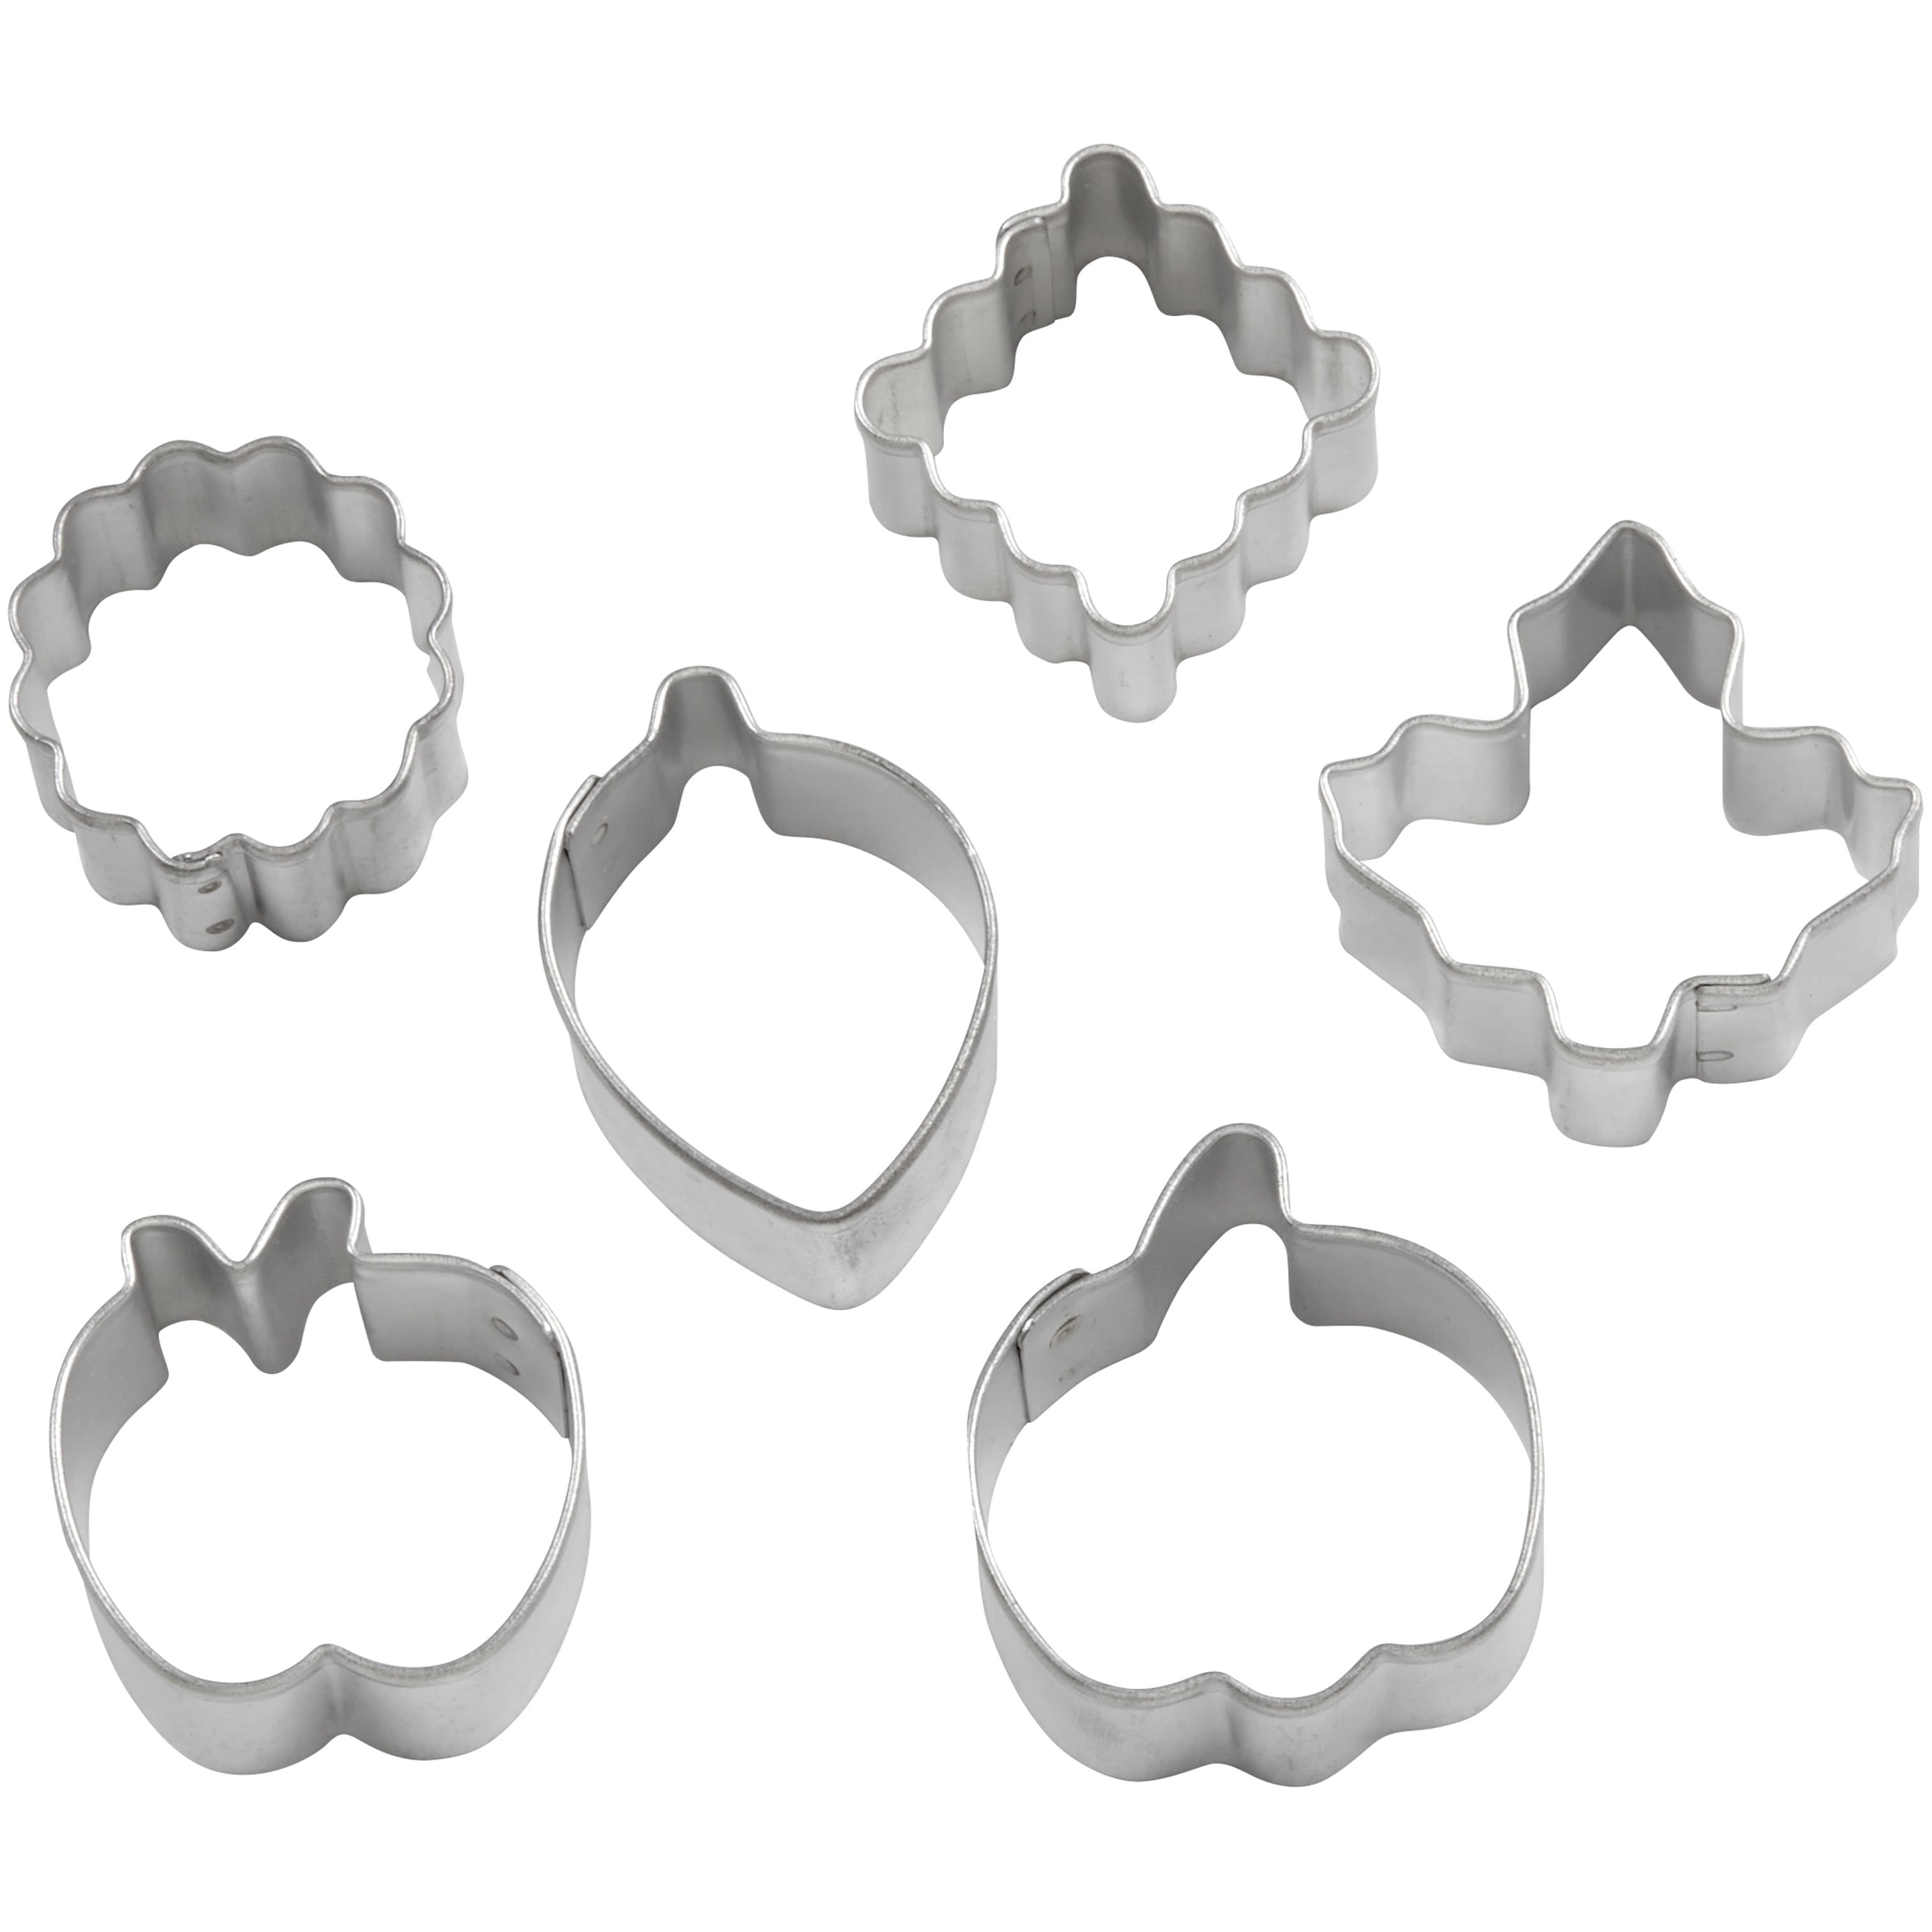 The cellar Harvest 4-pc. Leaf Pie Crust & Pastry Cutters Set, Created for Macy's